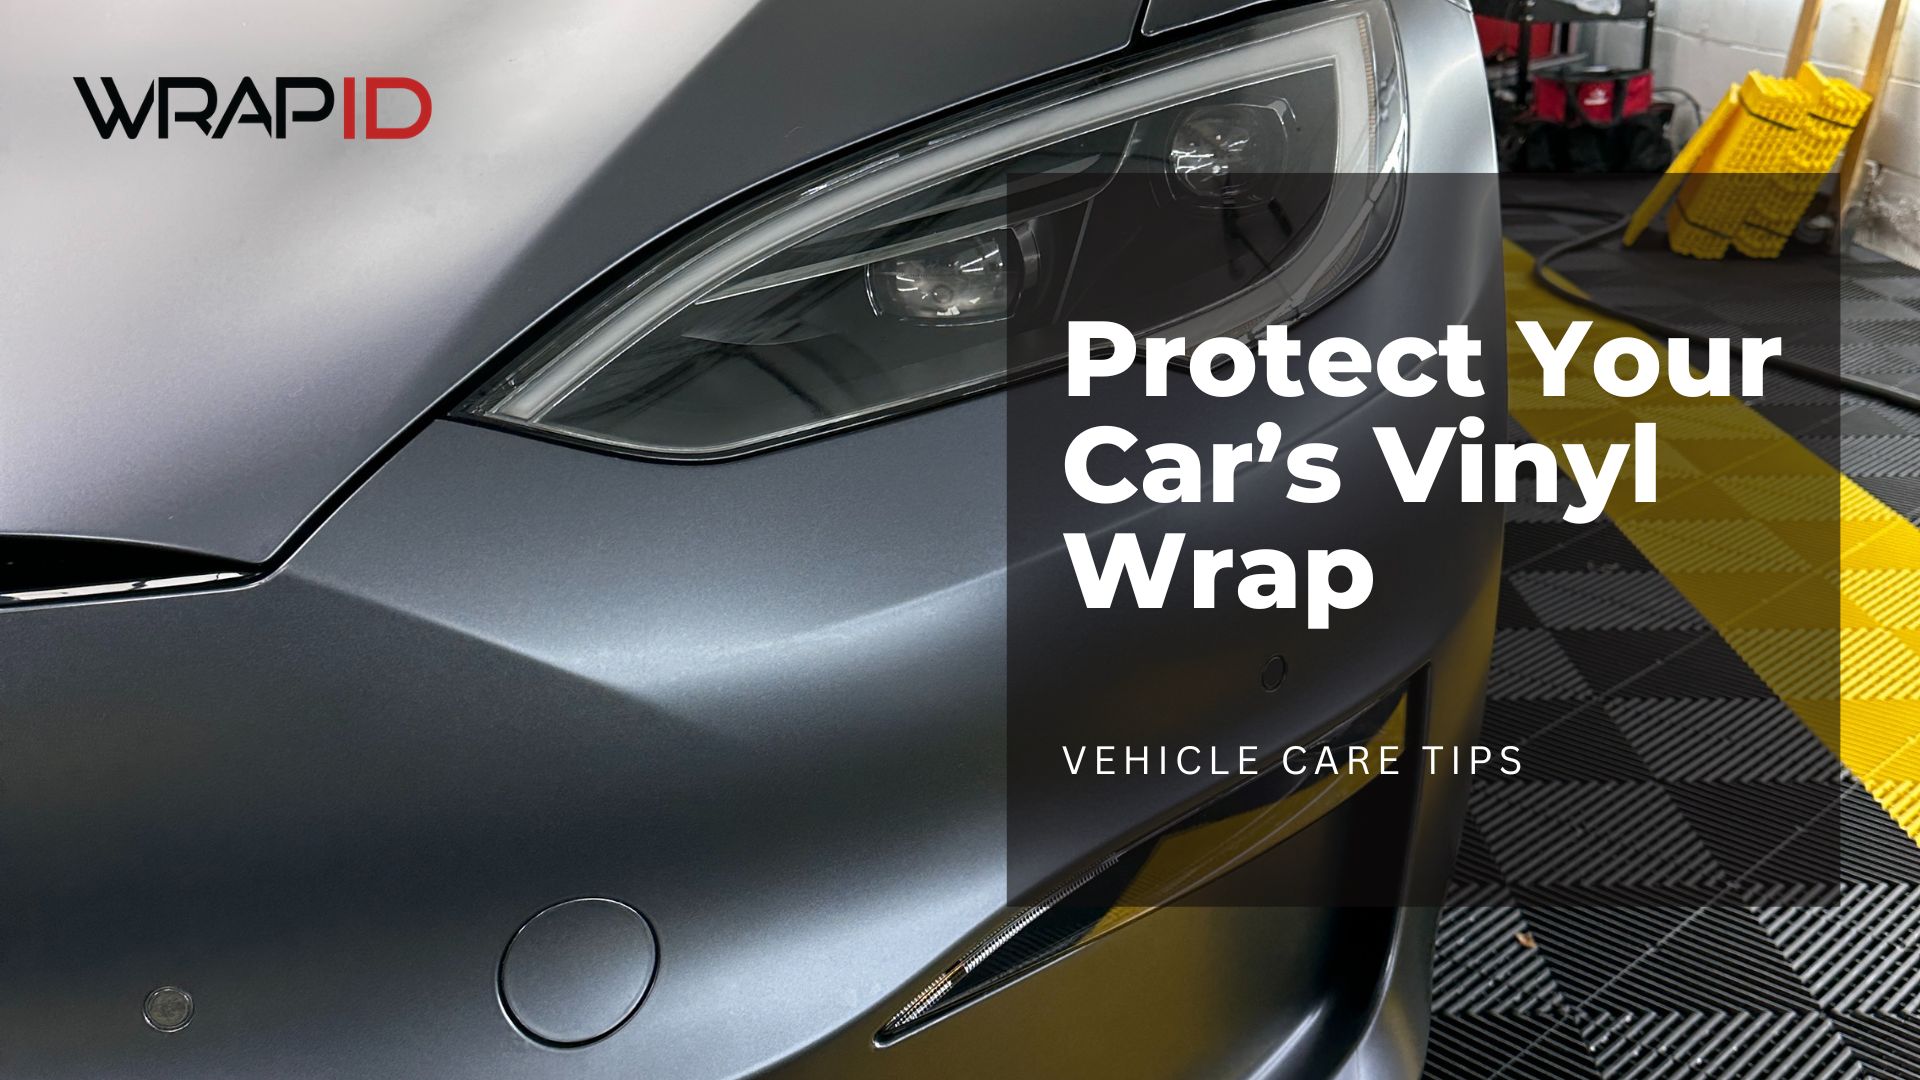 How-To Clean and Protect a Vinyl Wrap